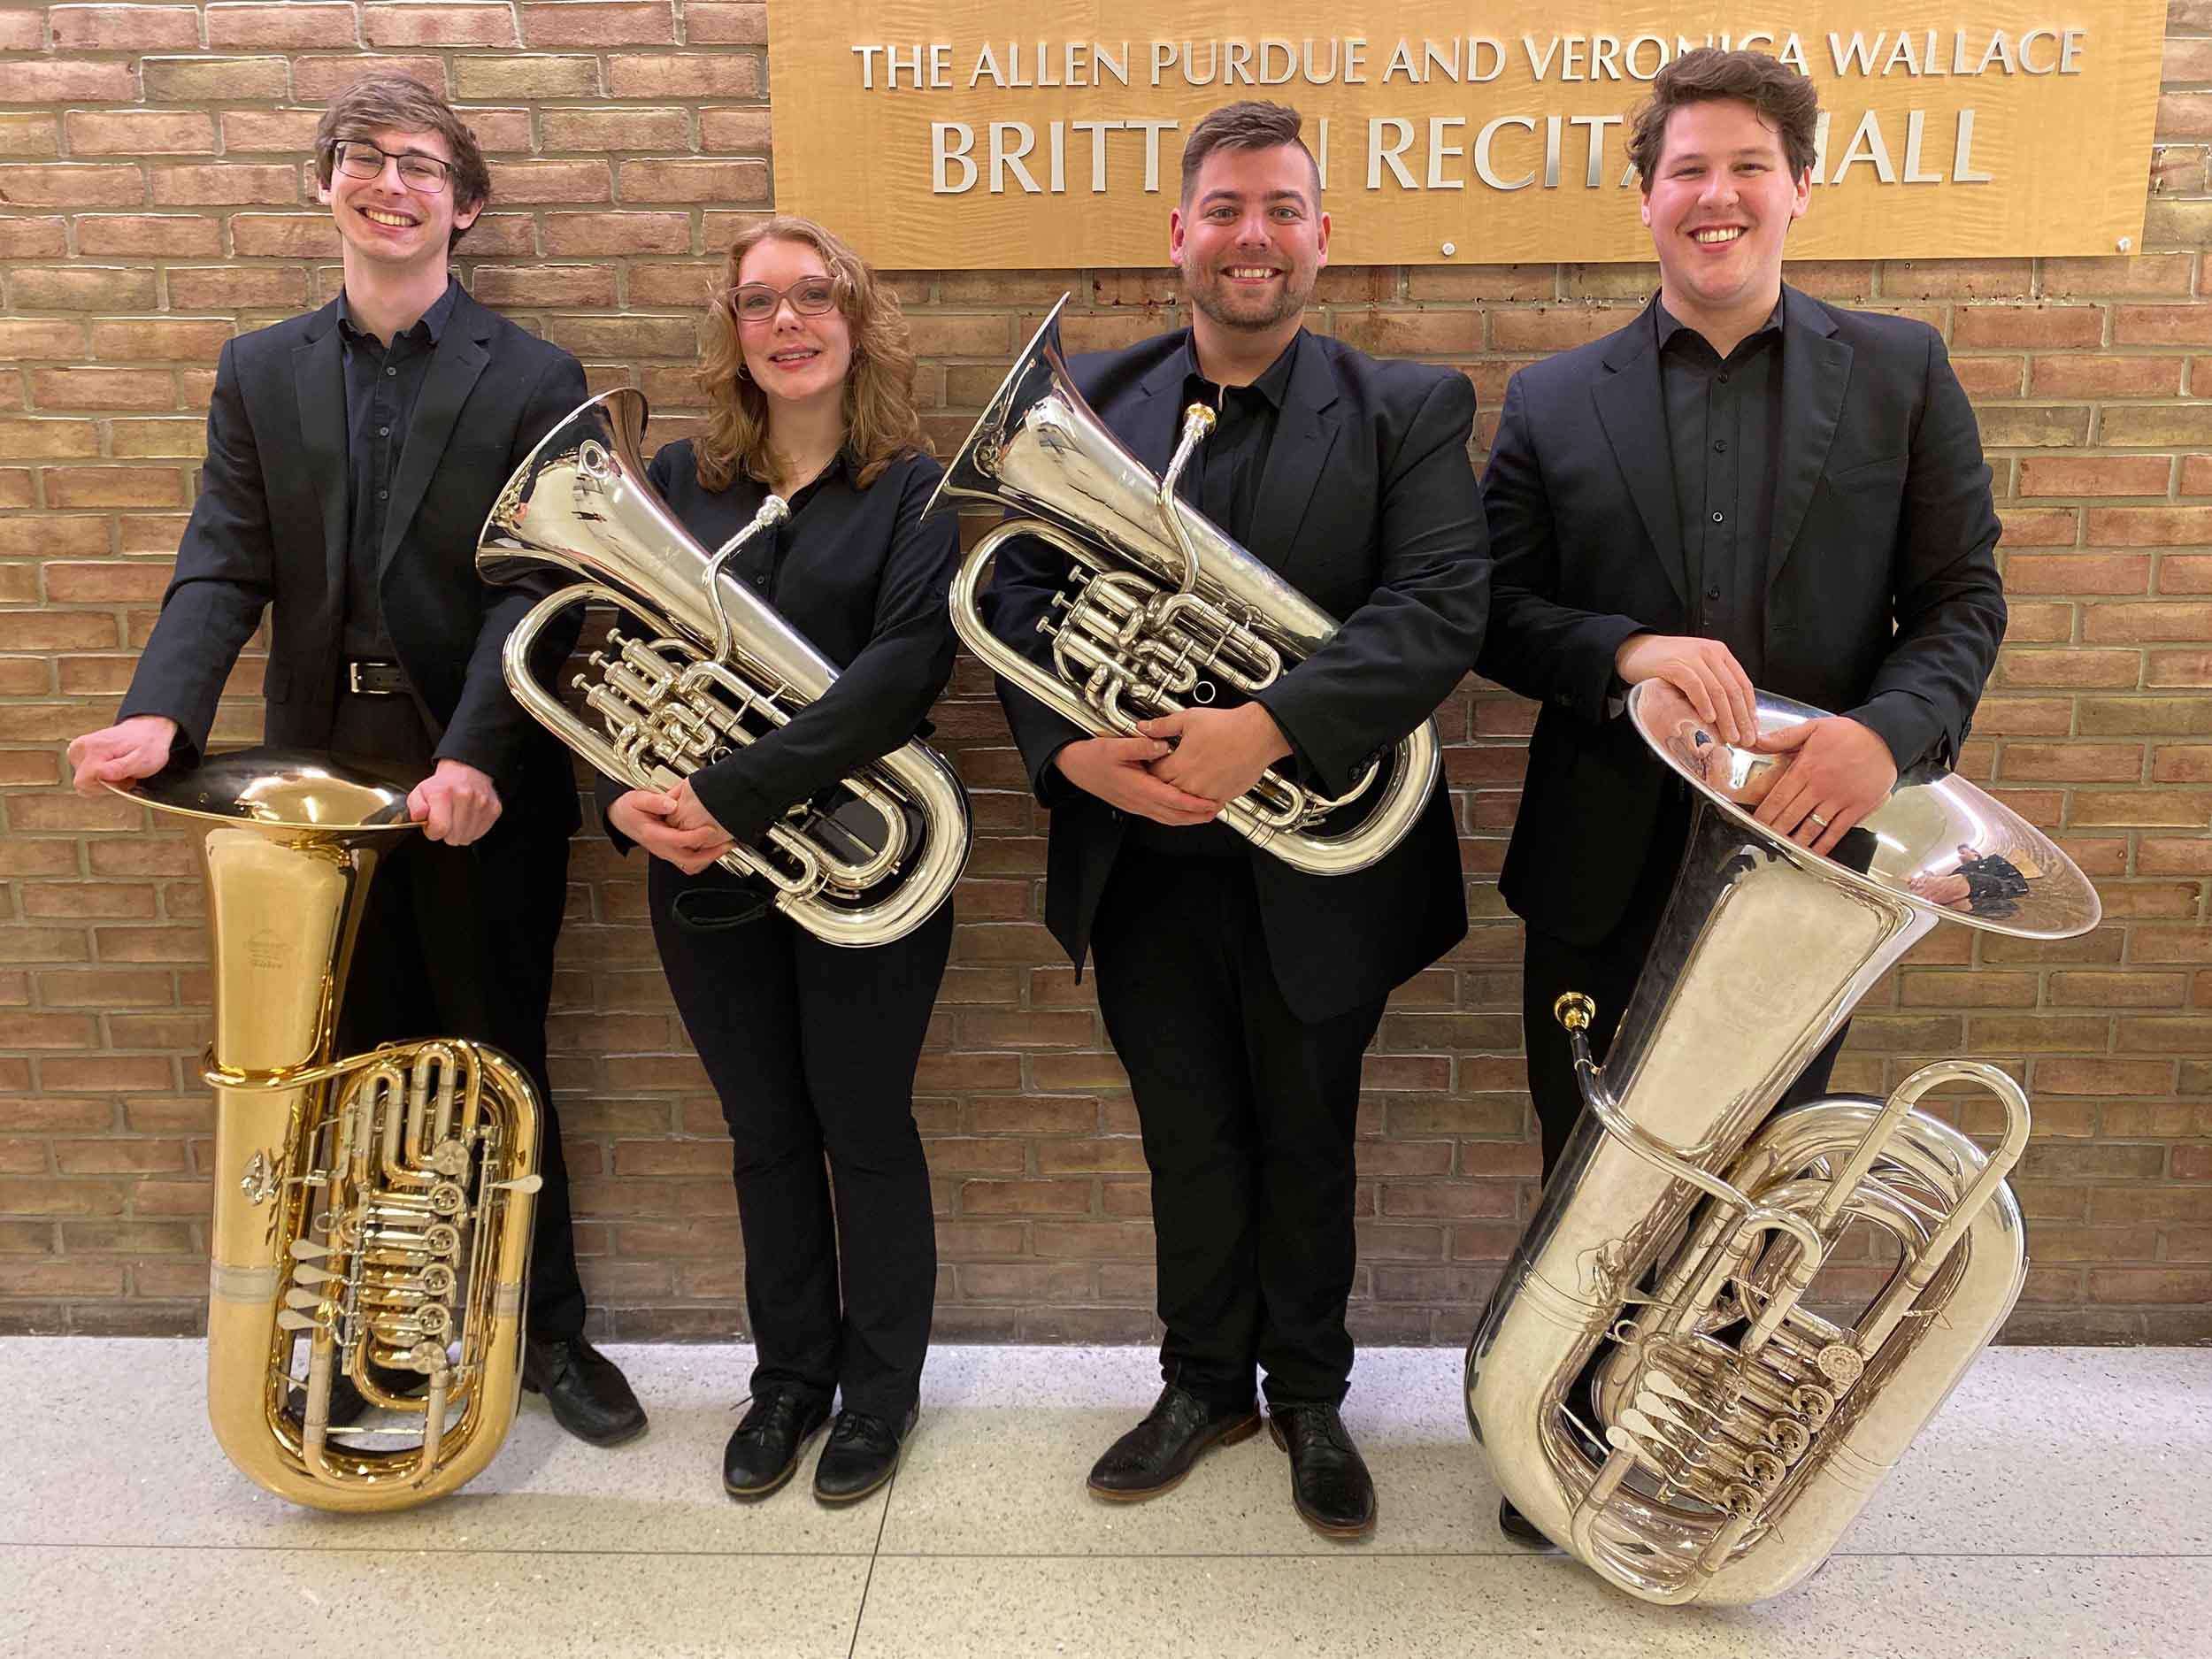 Four musicians pose standing wearing black; each holding a tuba